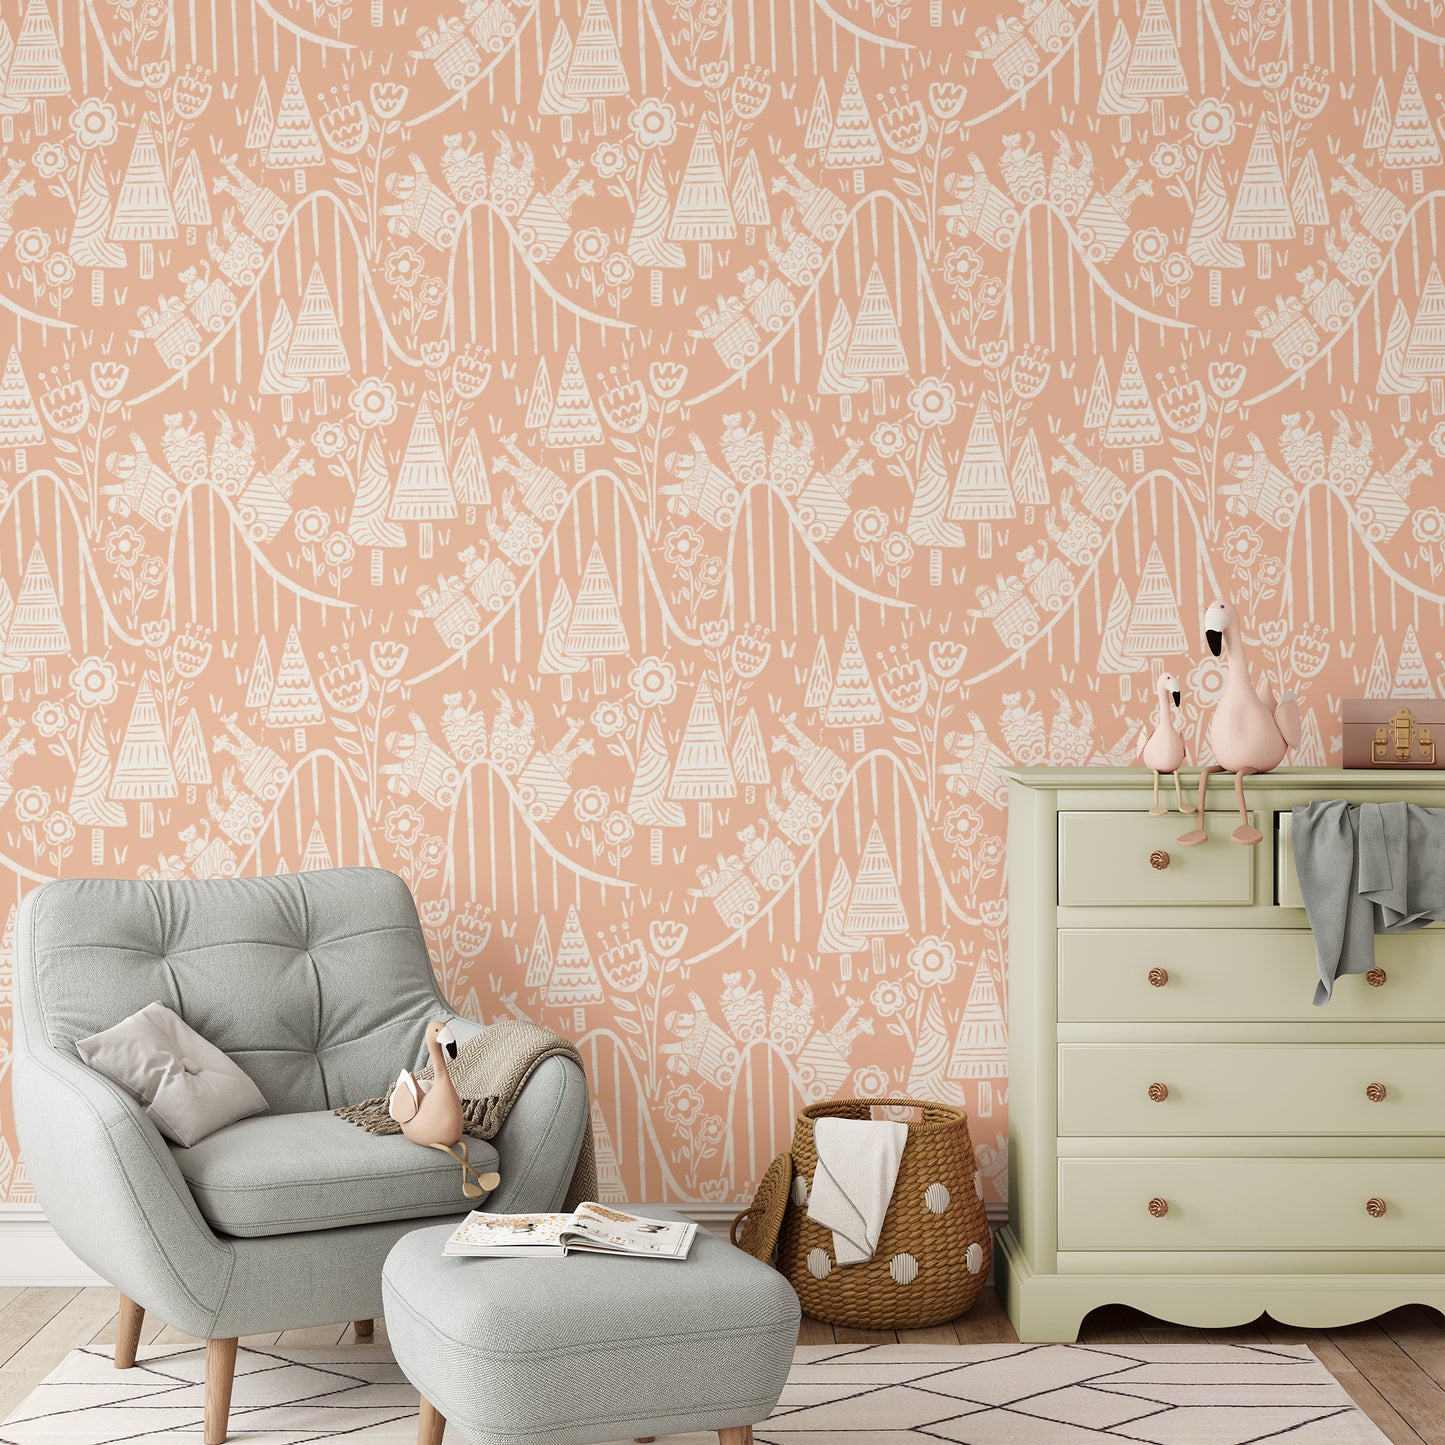 Houses Wallpaper in Apricot Background shown in a nursery.